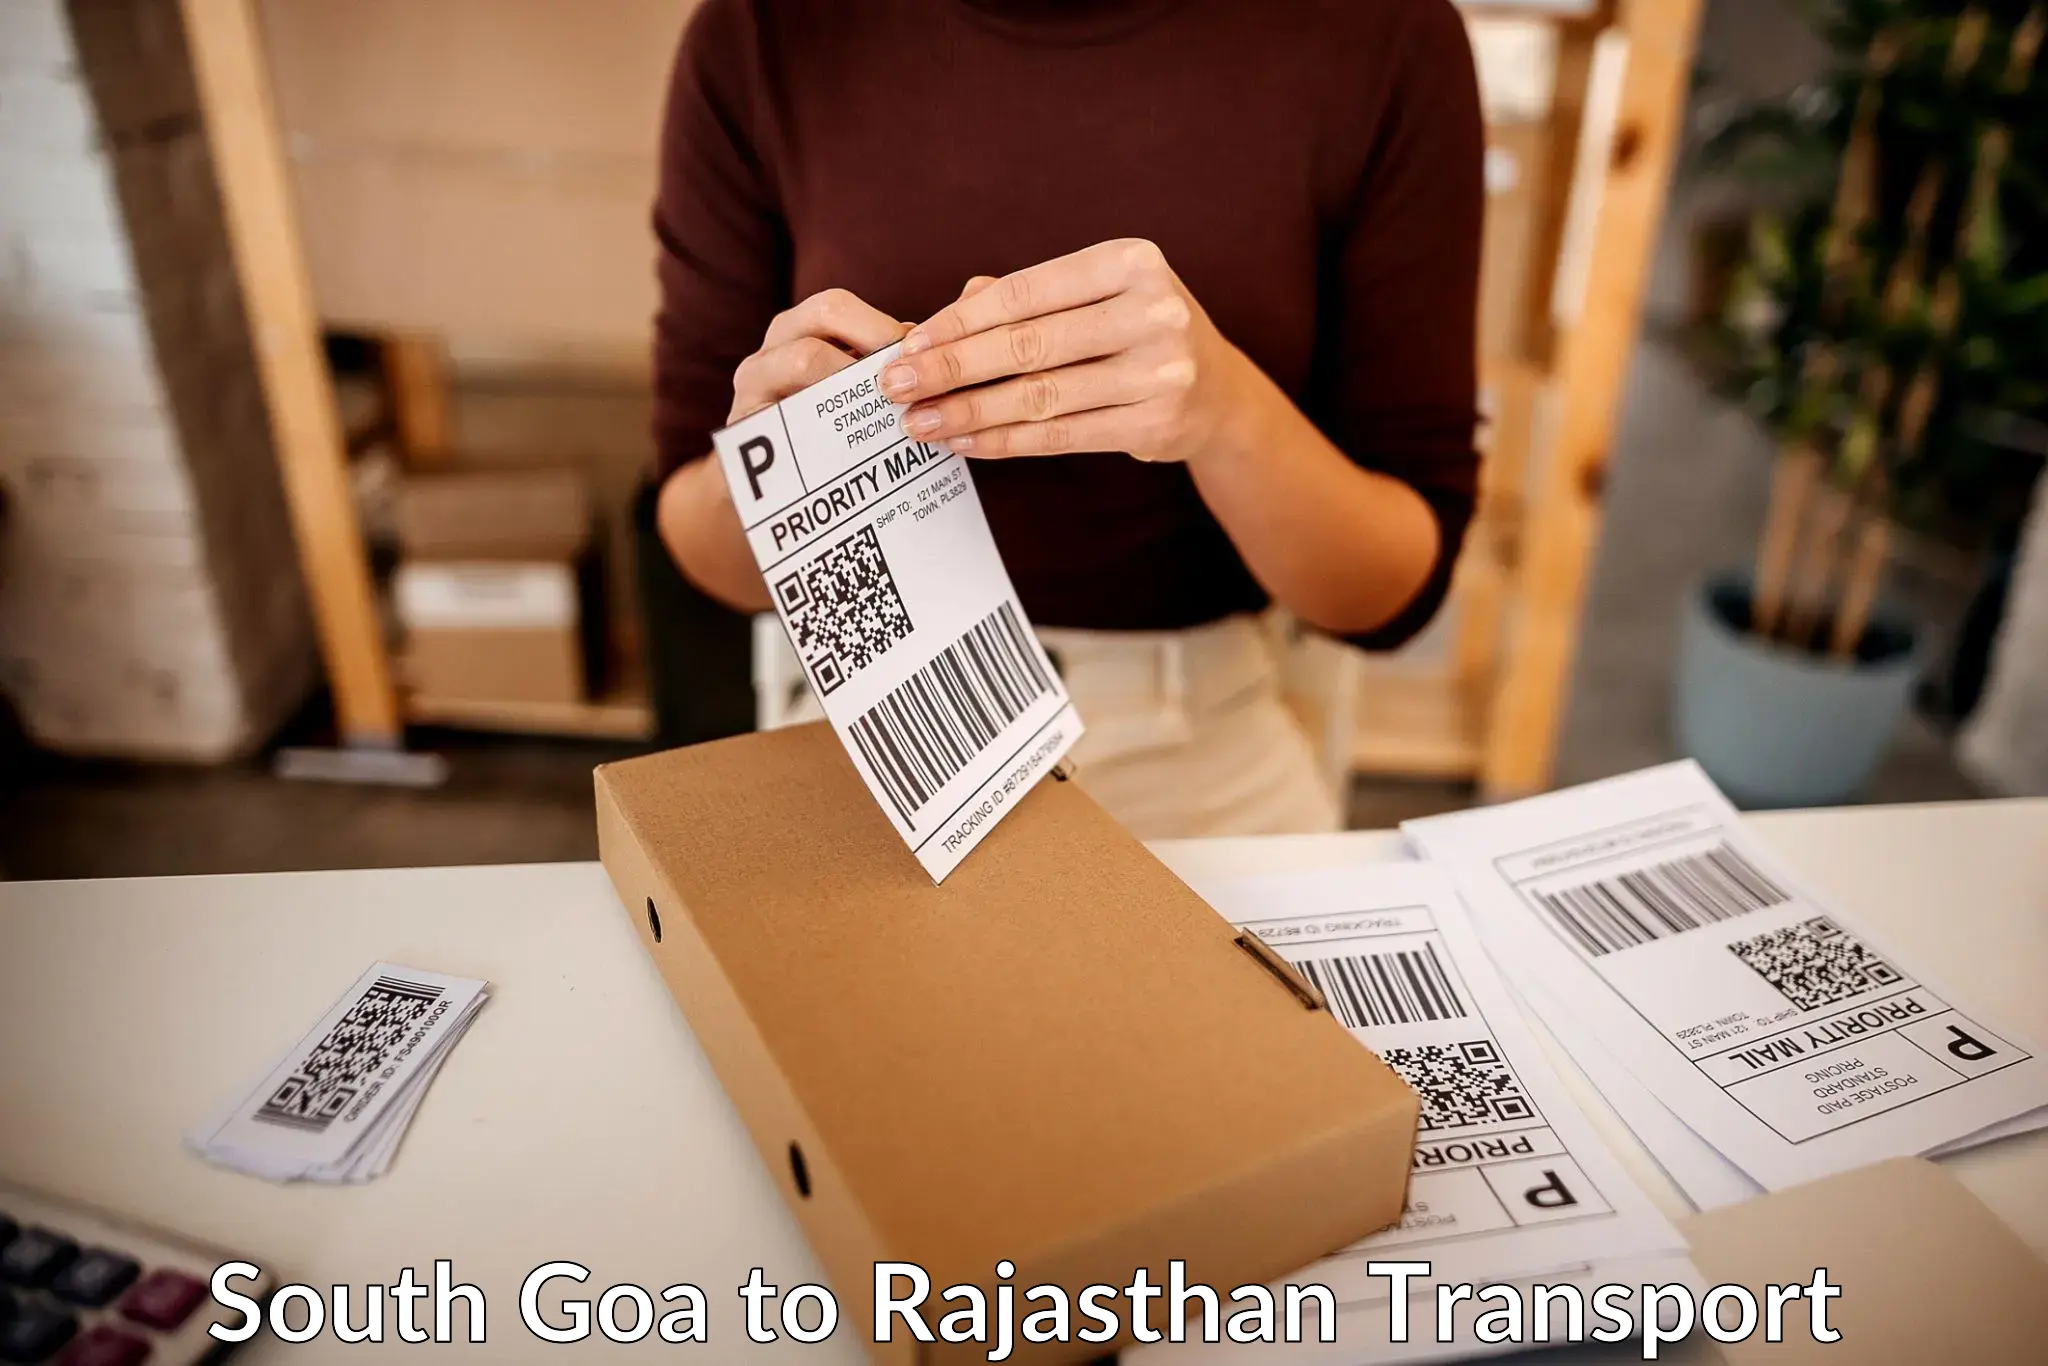 Material transport services South Goa to Nasirabad